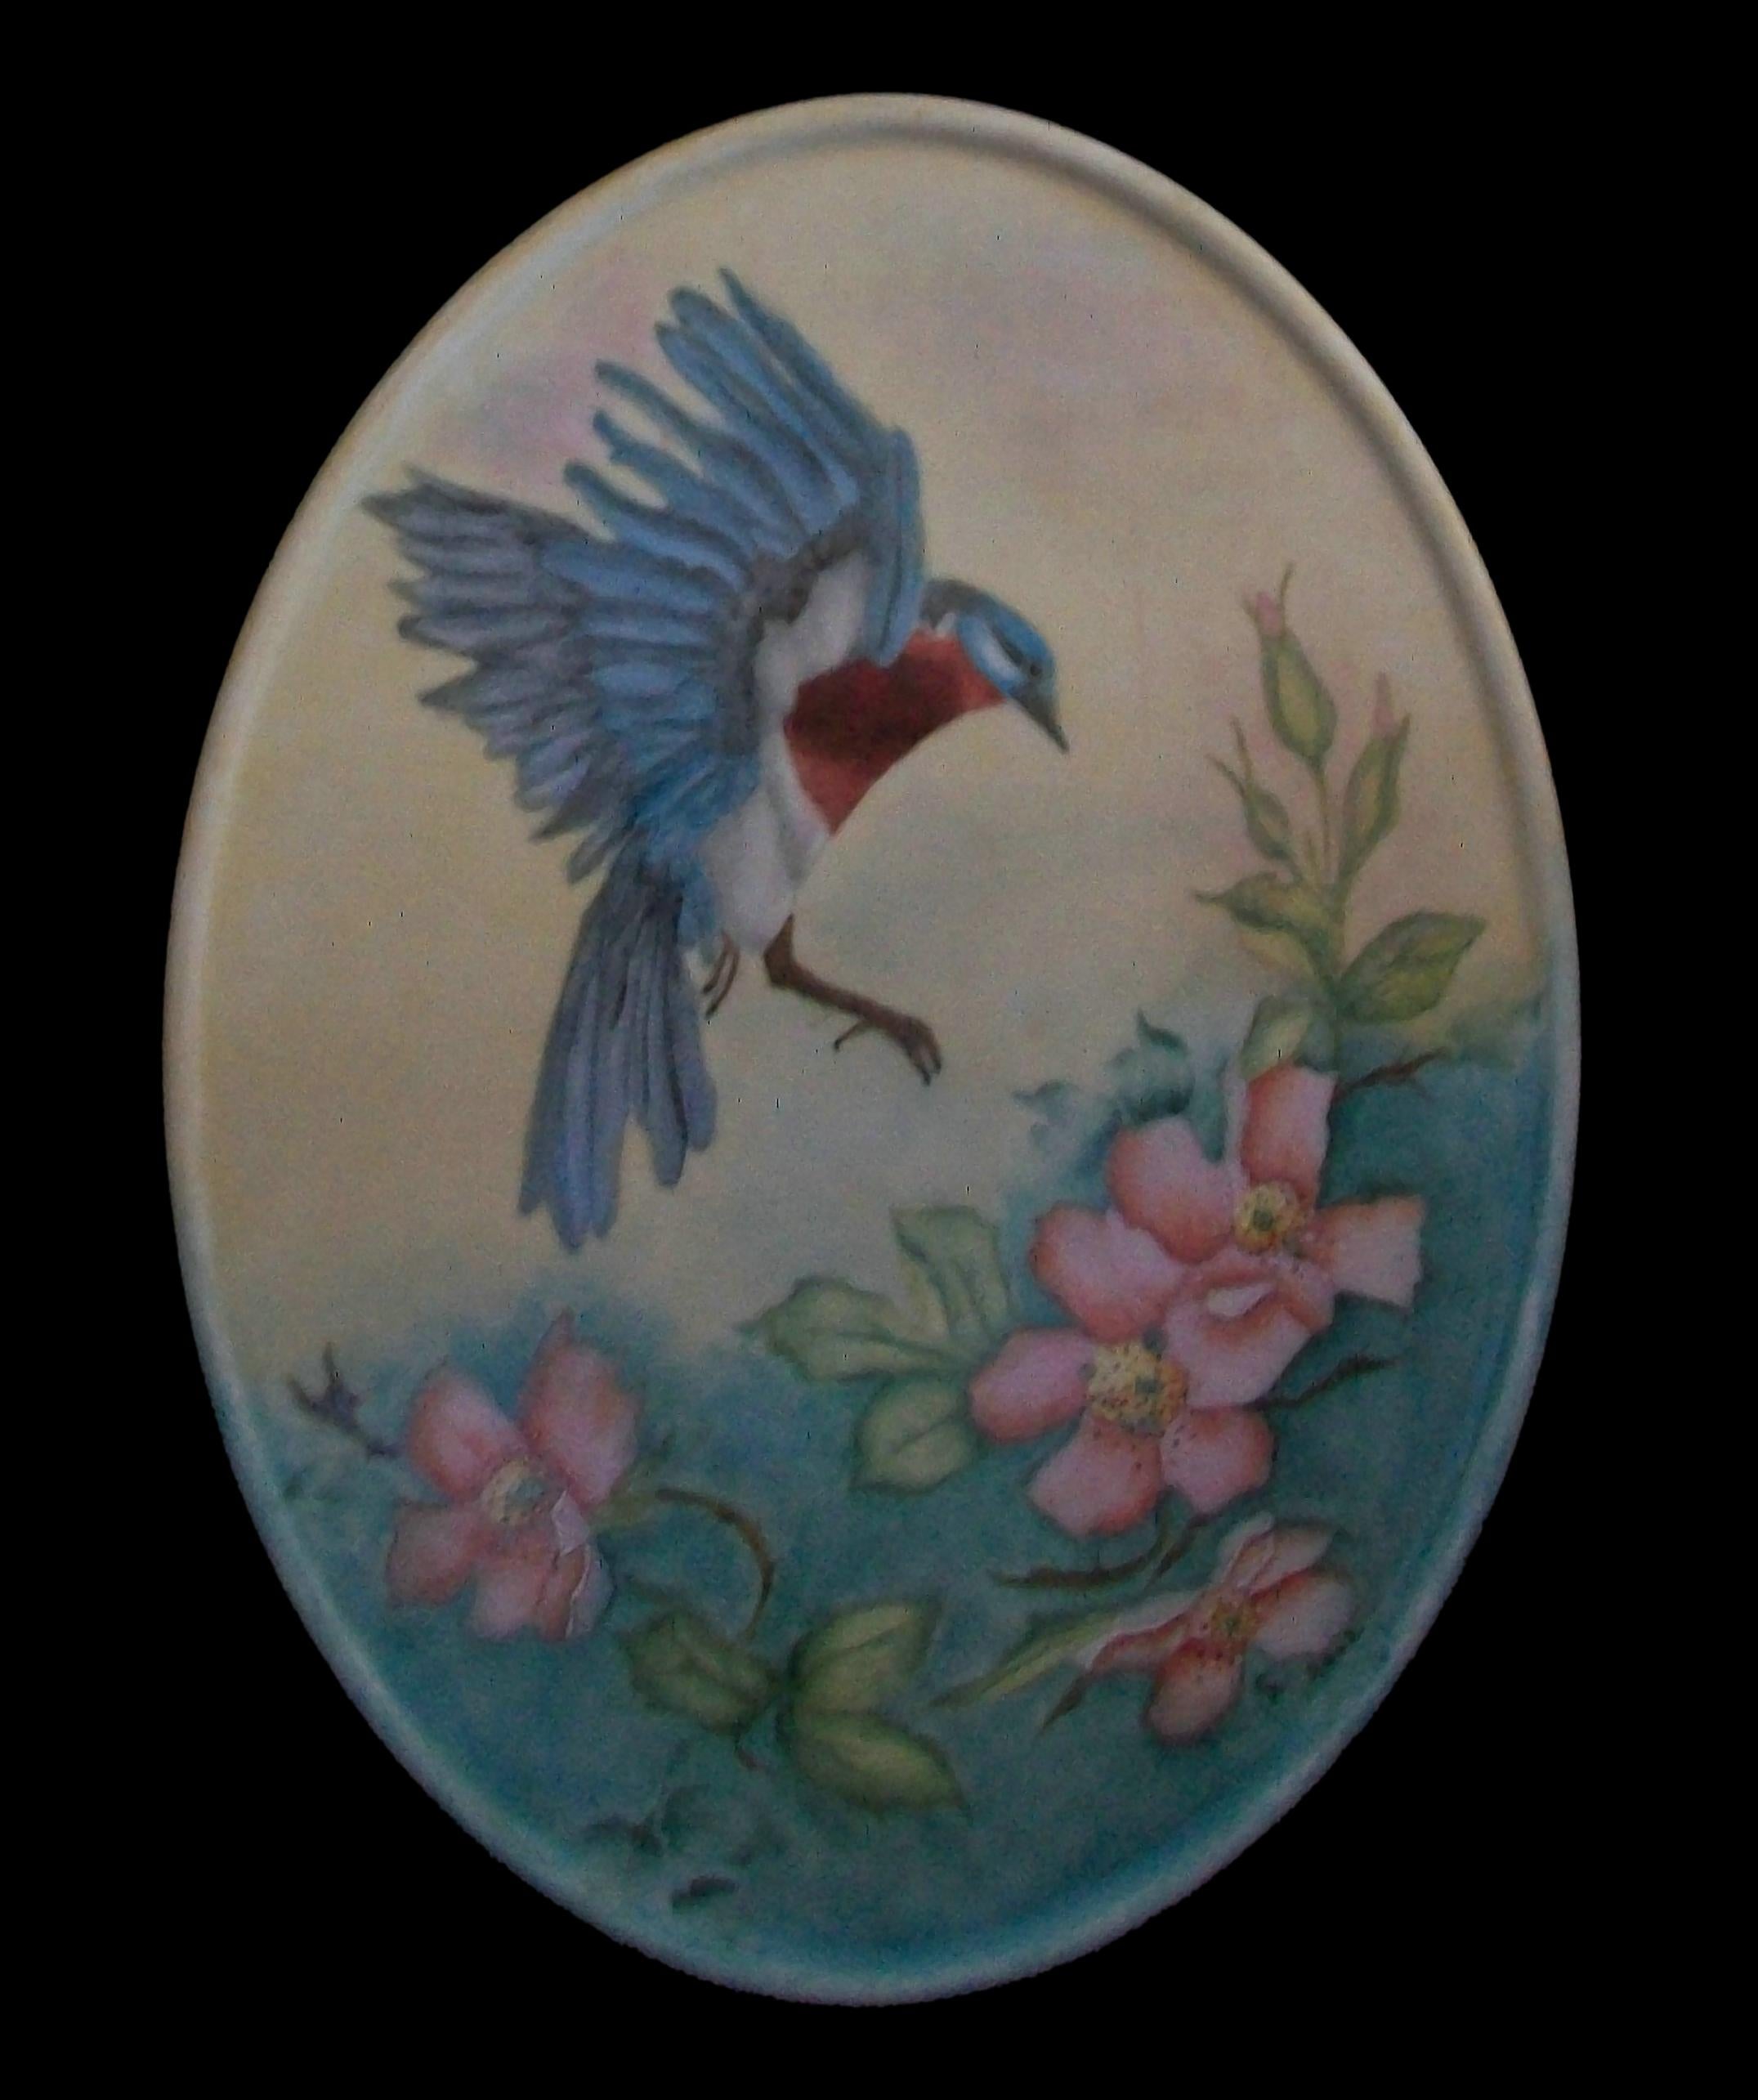 Dresden, Blue Bird & Floral Porcelain Plaque, Signed, Germany, circa 2002 In Good Condition For Sale In Chatham, ON